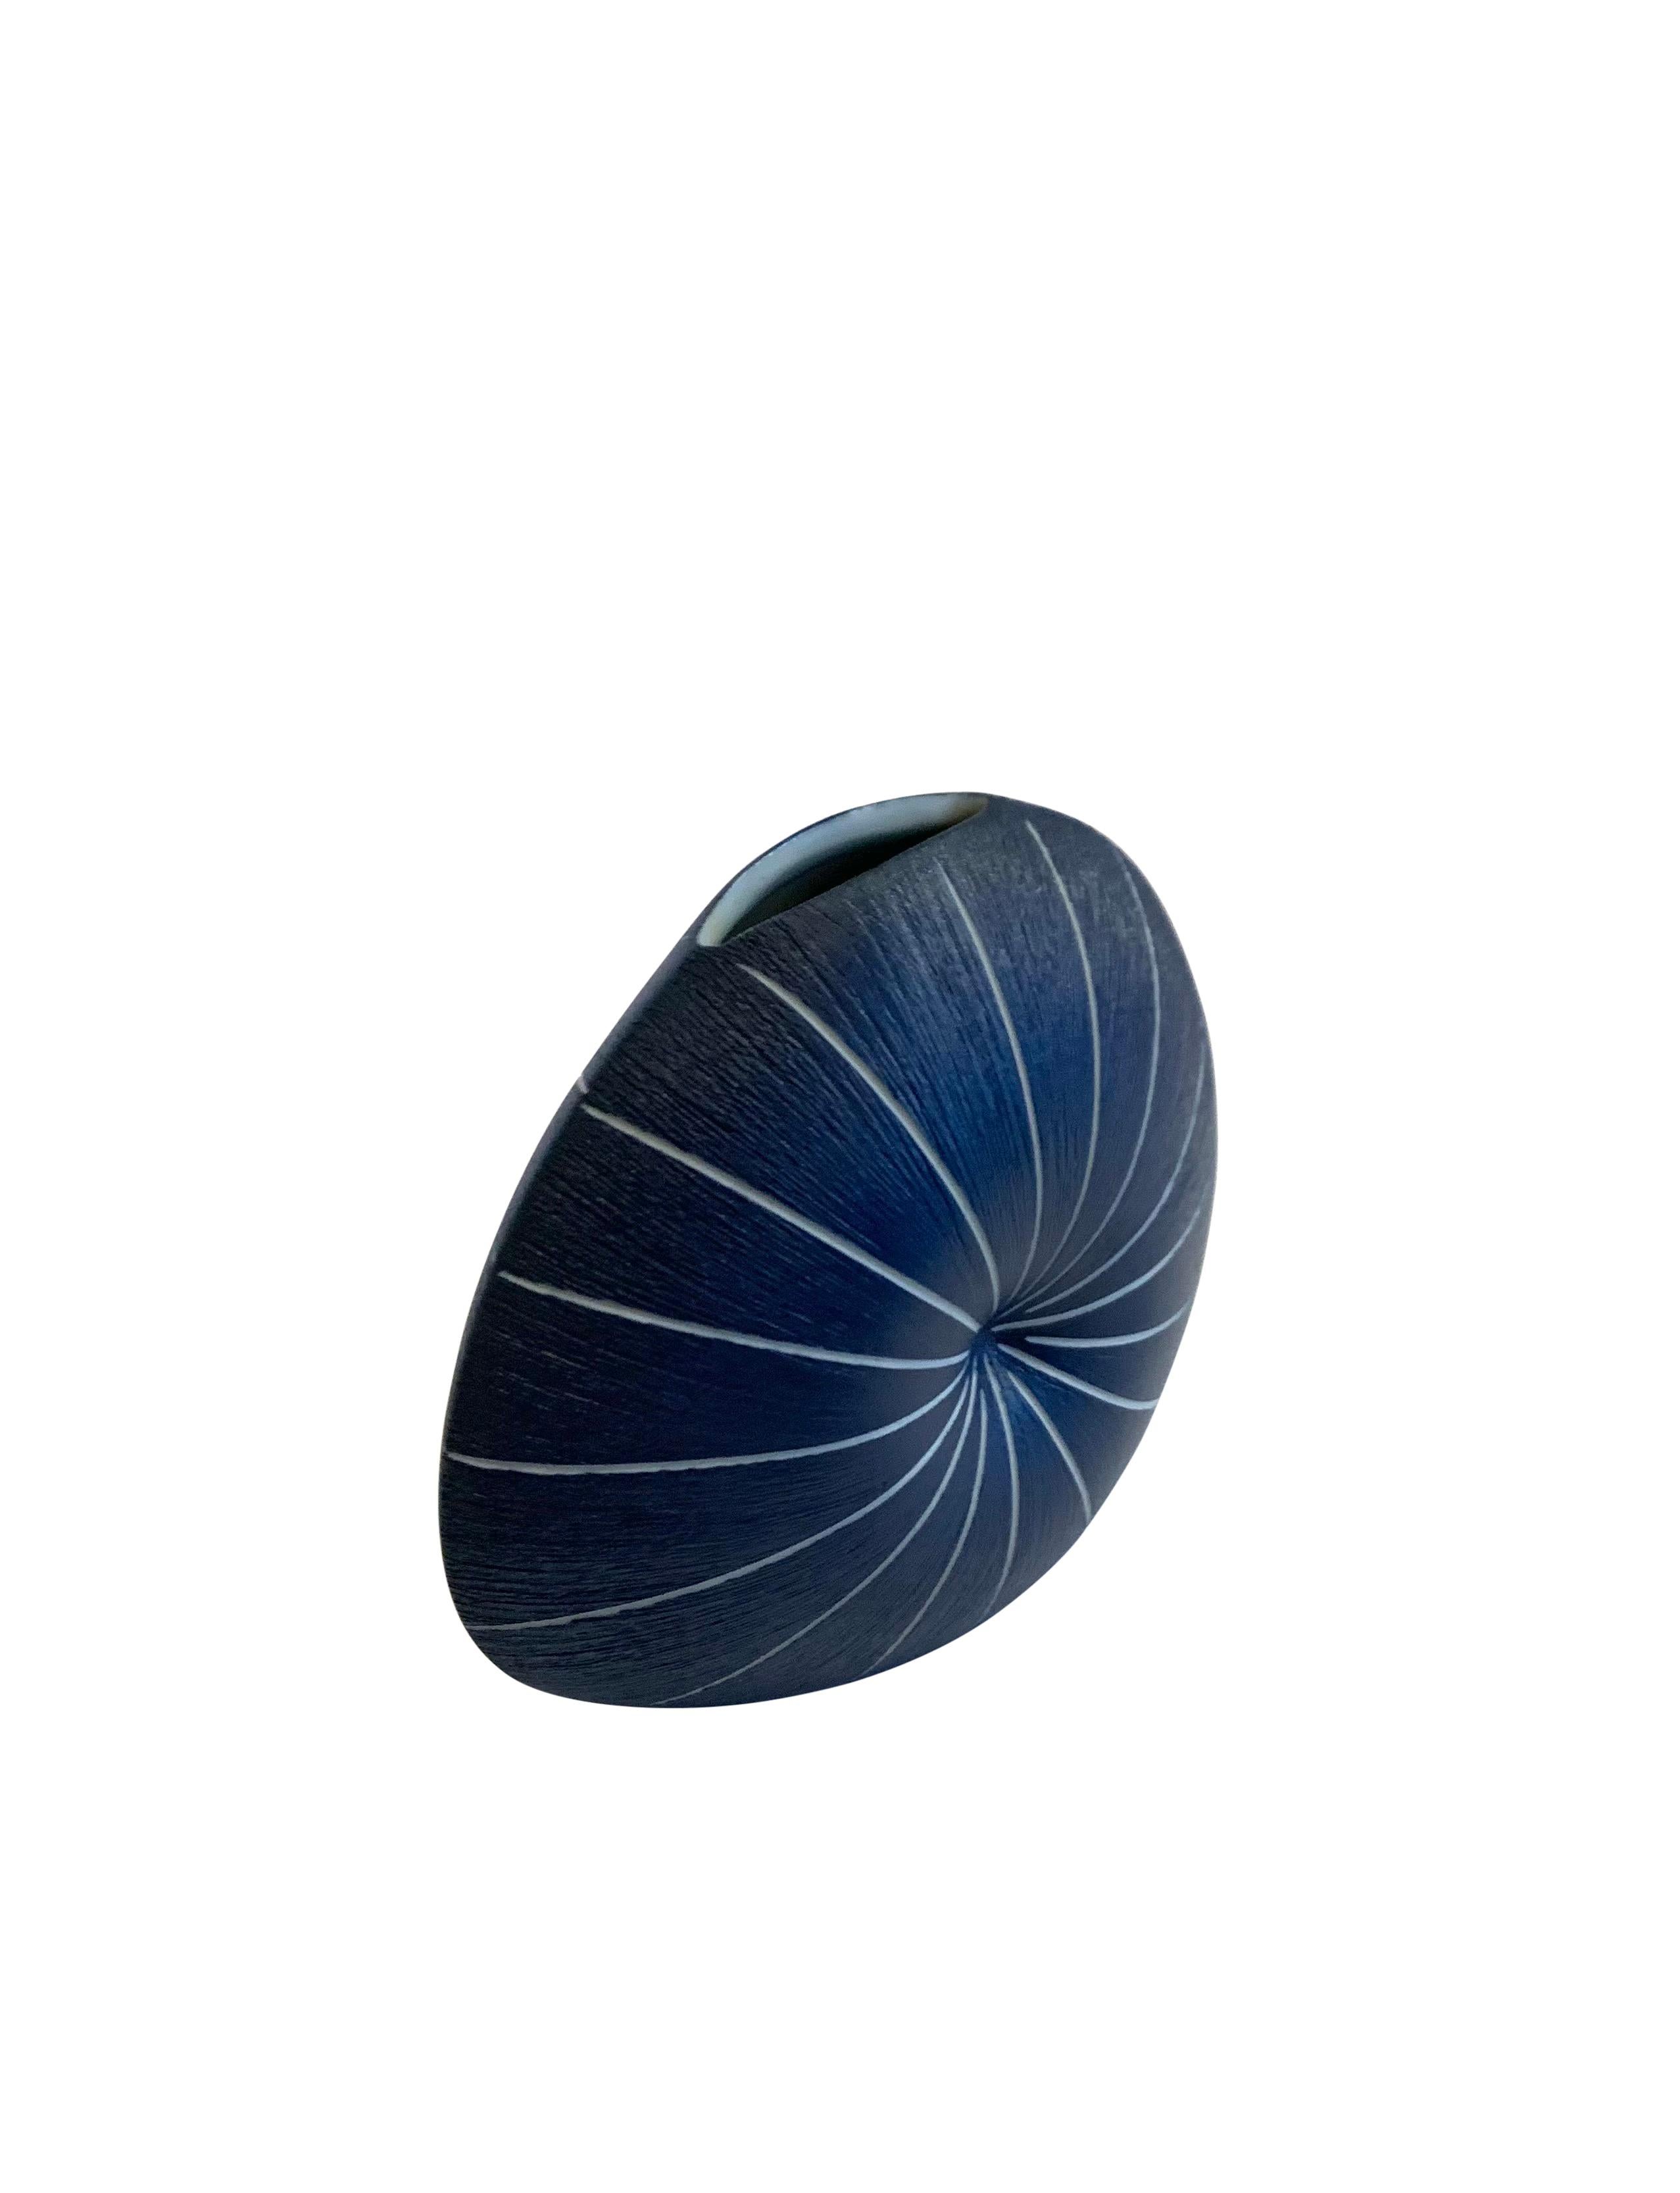 Contemporary Thailand dark blue and white striped vase.
Starburst pattern design in a round shape.
Indent in the center creates the starburst pattern.
Can hold water.
Larger size also available ( S5853 )
Part of a collection of unusually shaped